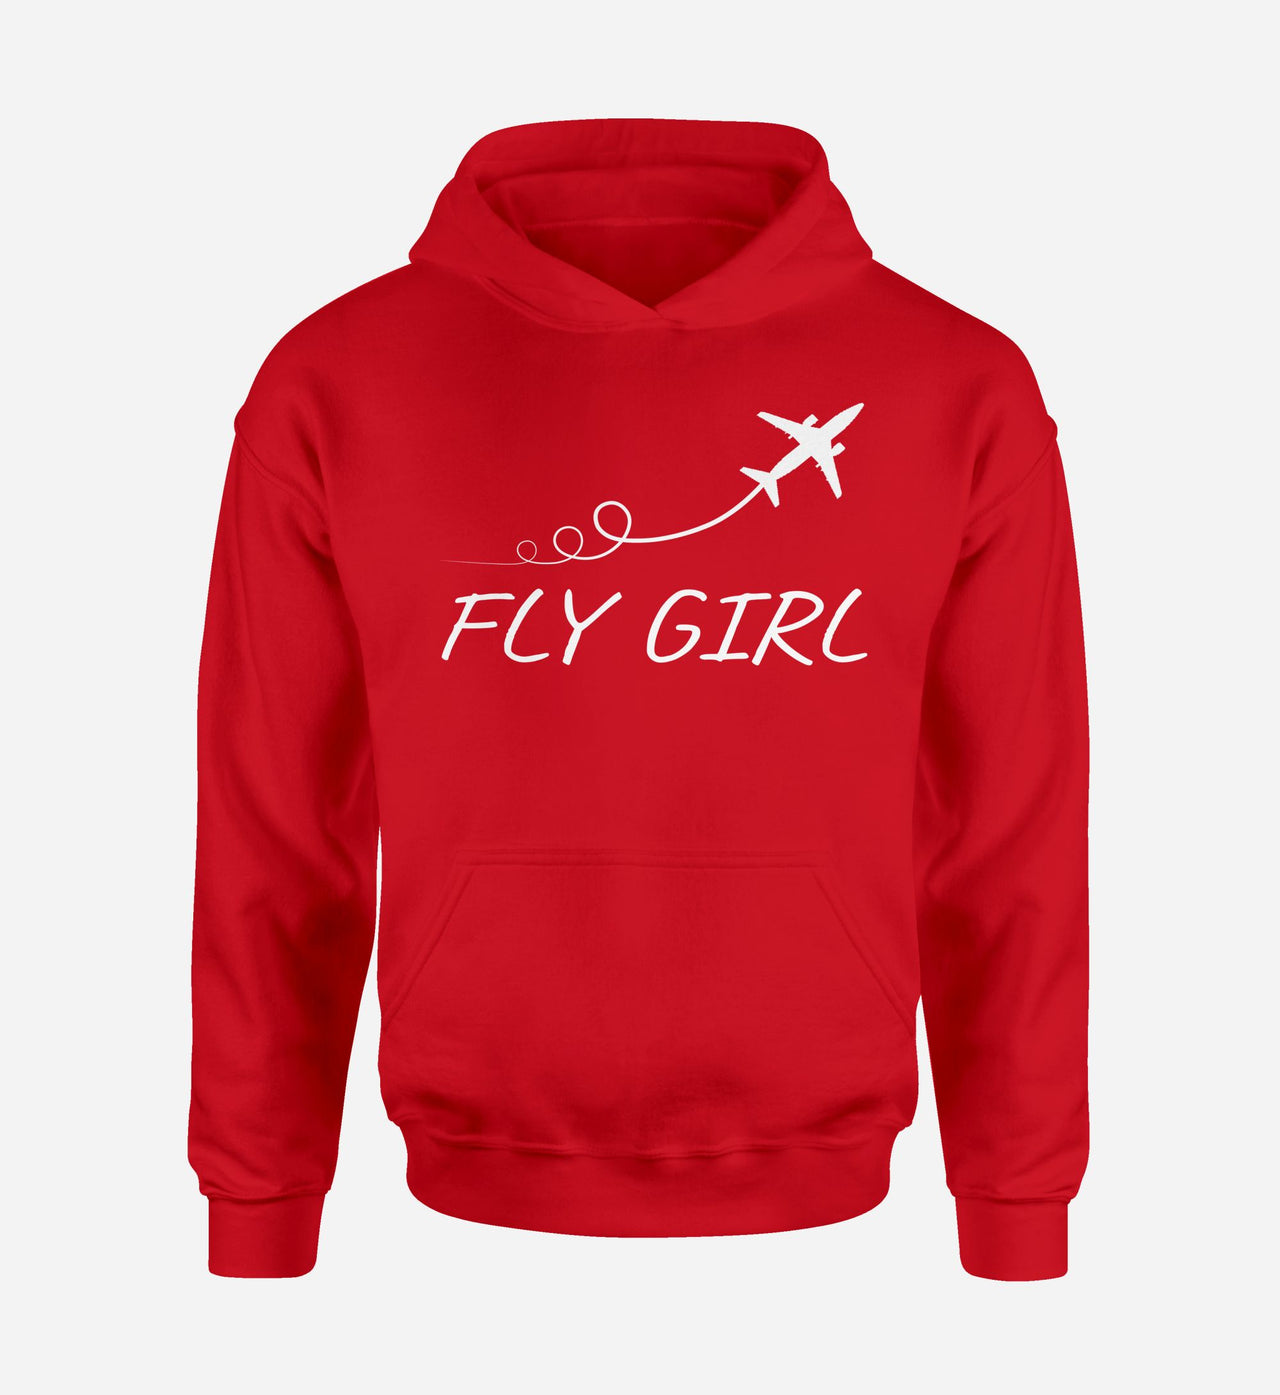 Just Fly It & Fly Girl Designed Hoodies